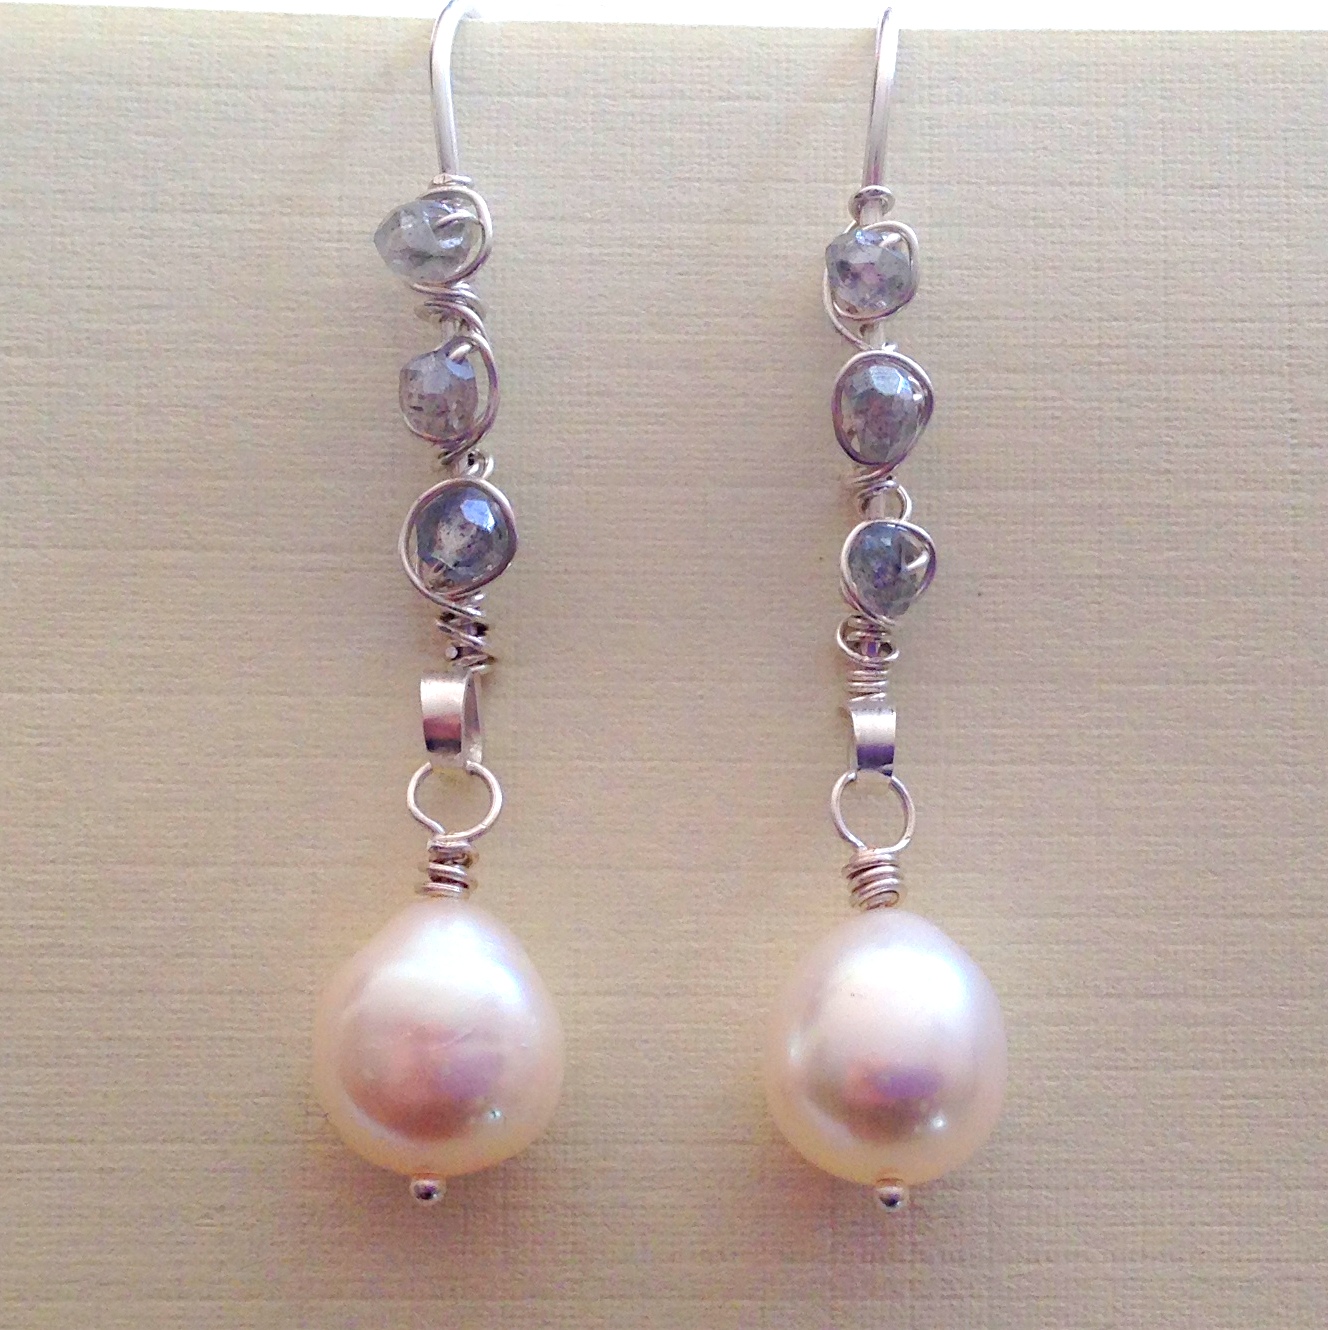 Lisa Yang Jewelry - Free Projects and Patterns: Baroque Pearl Drop ...